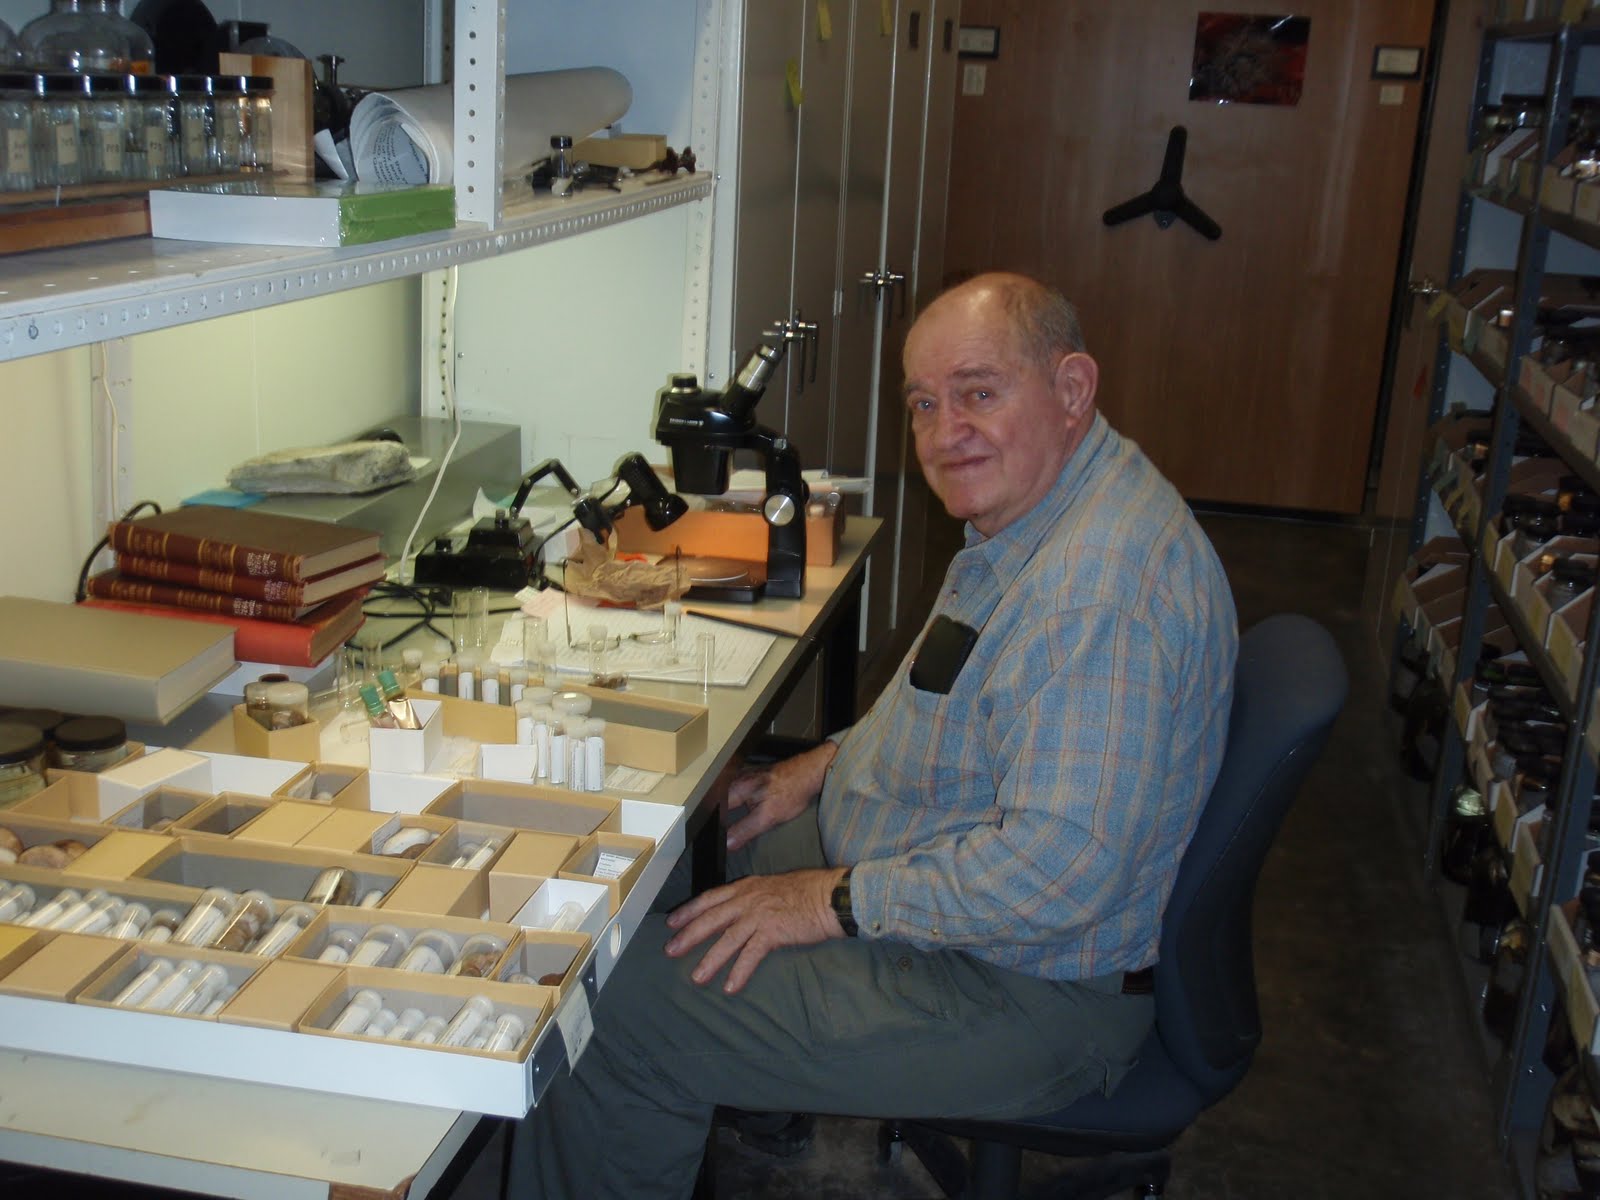 Fred at his workstation with trays of specimens